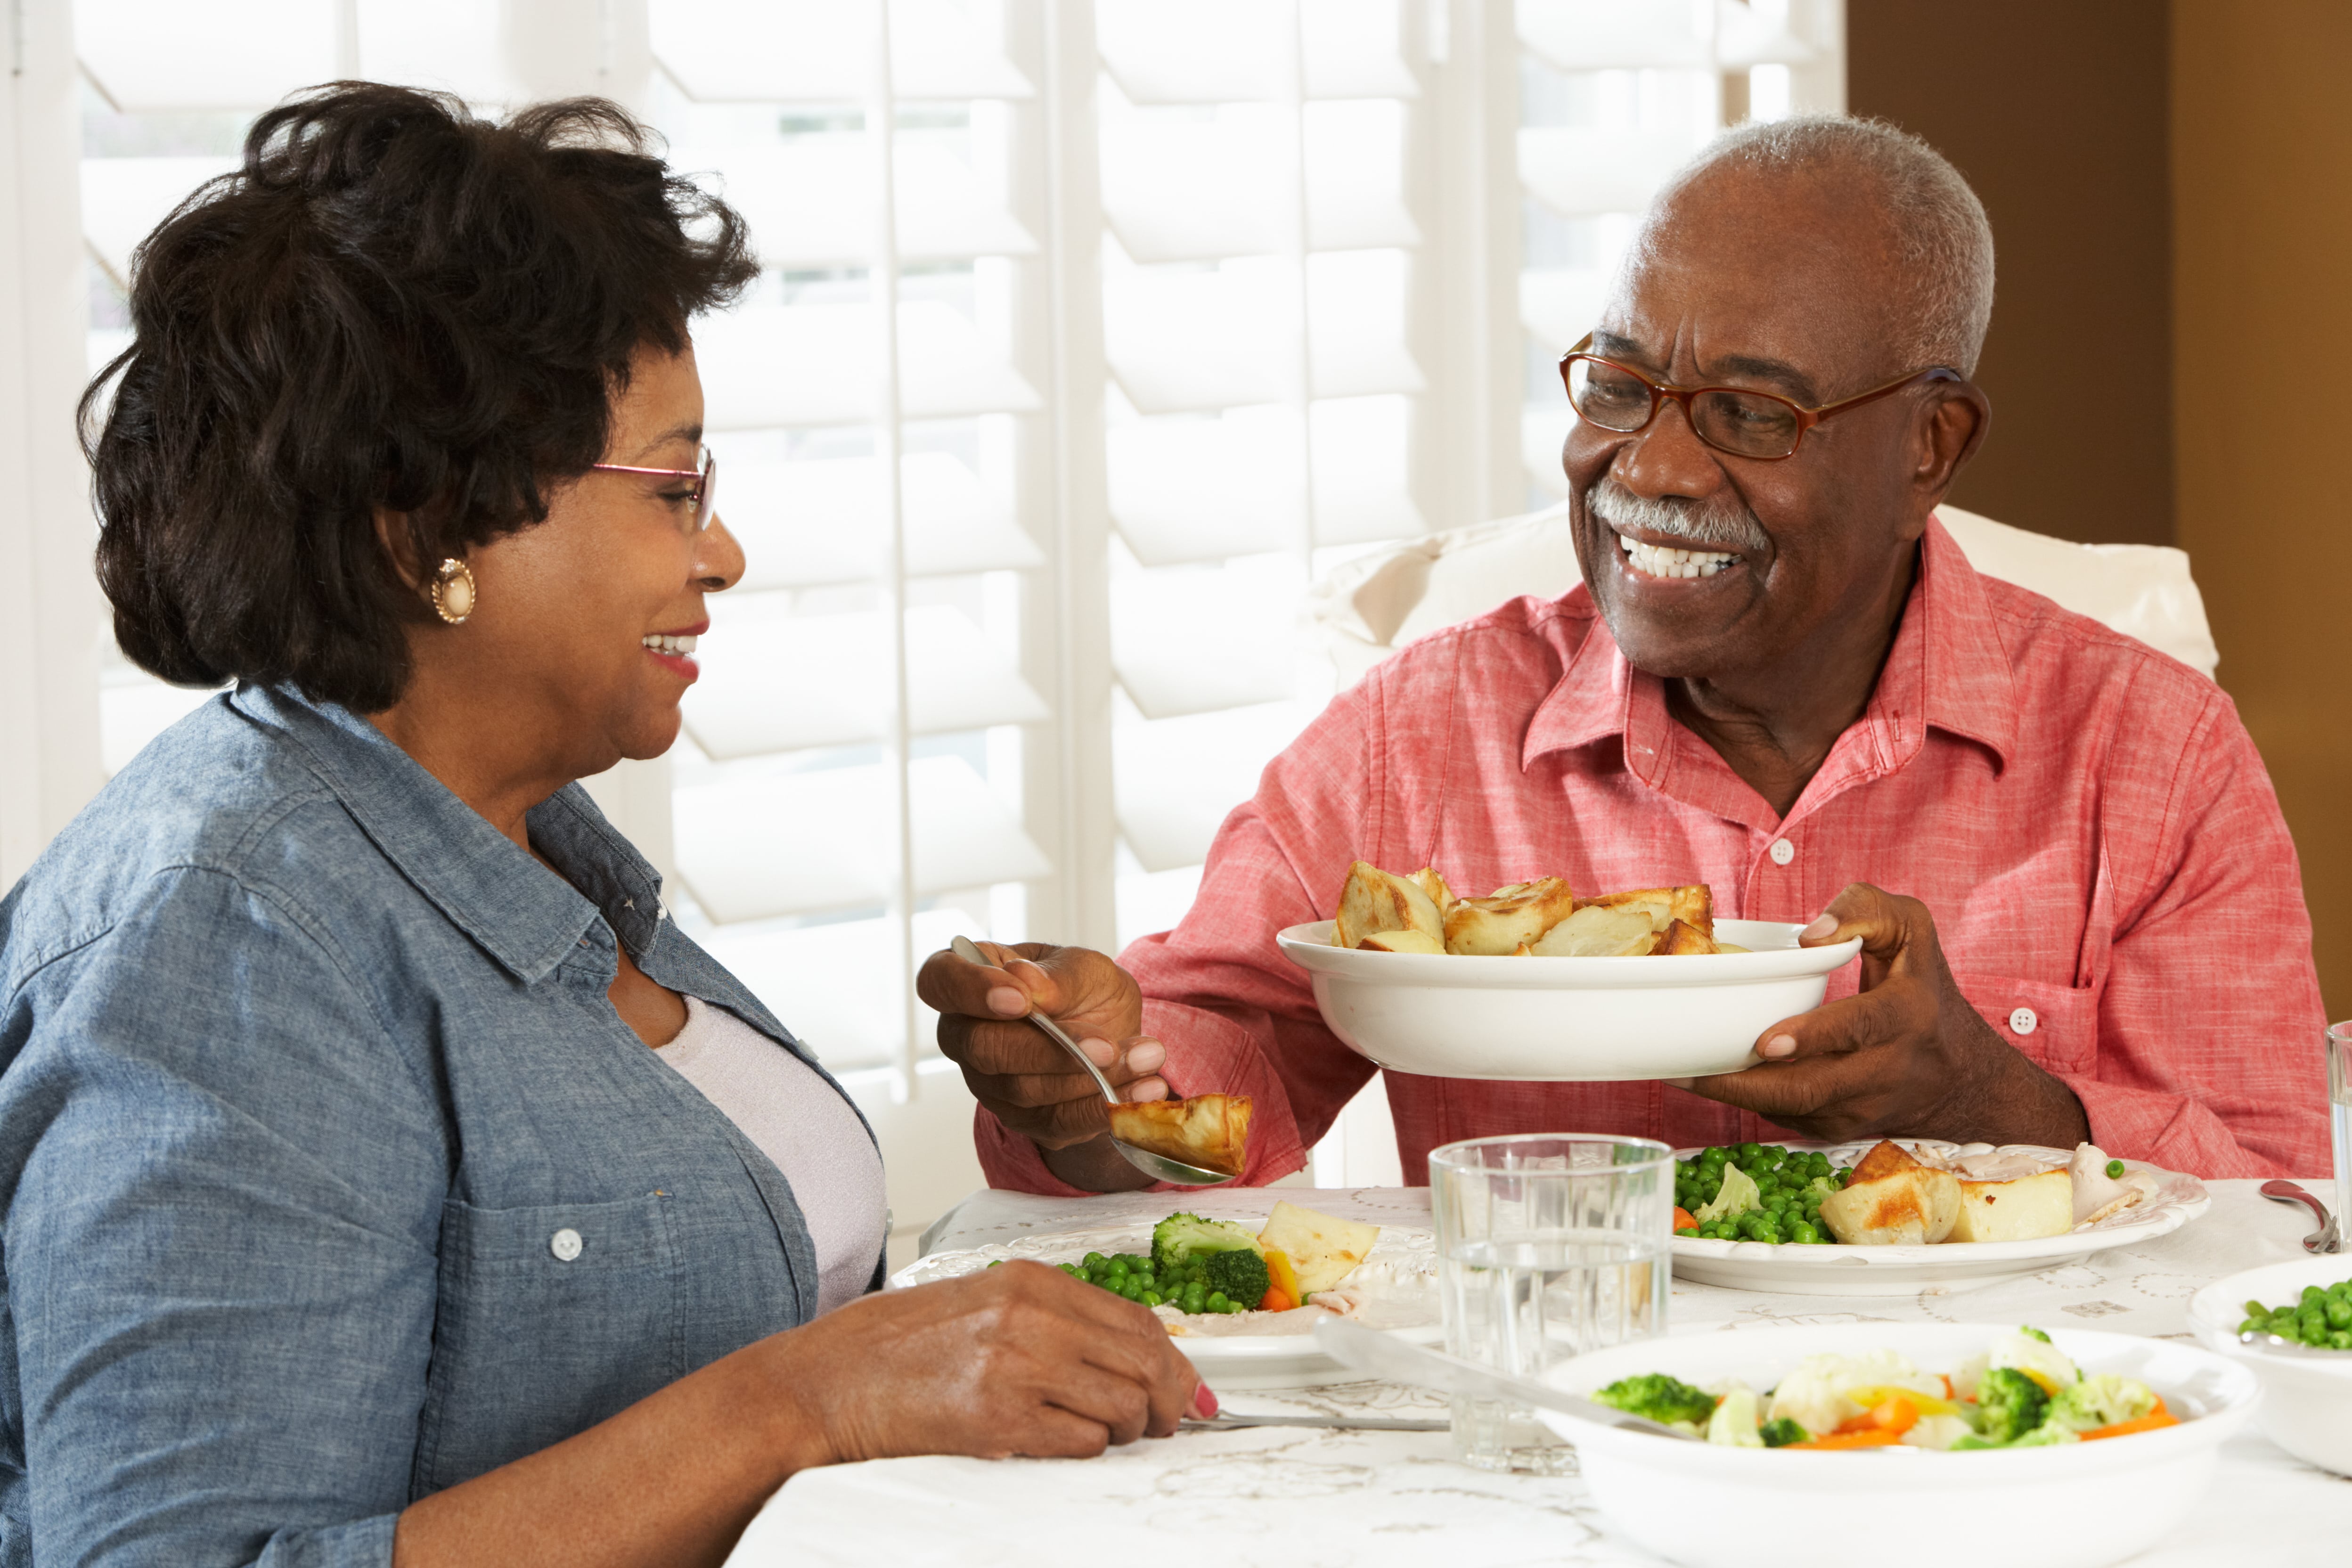 Two older adults sharing a meal together